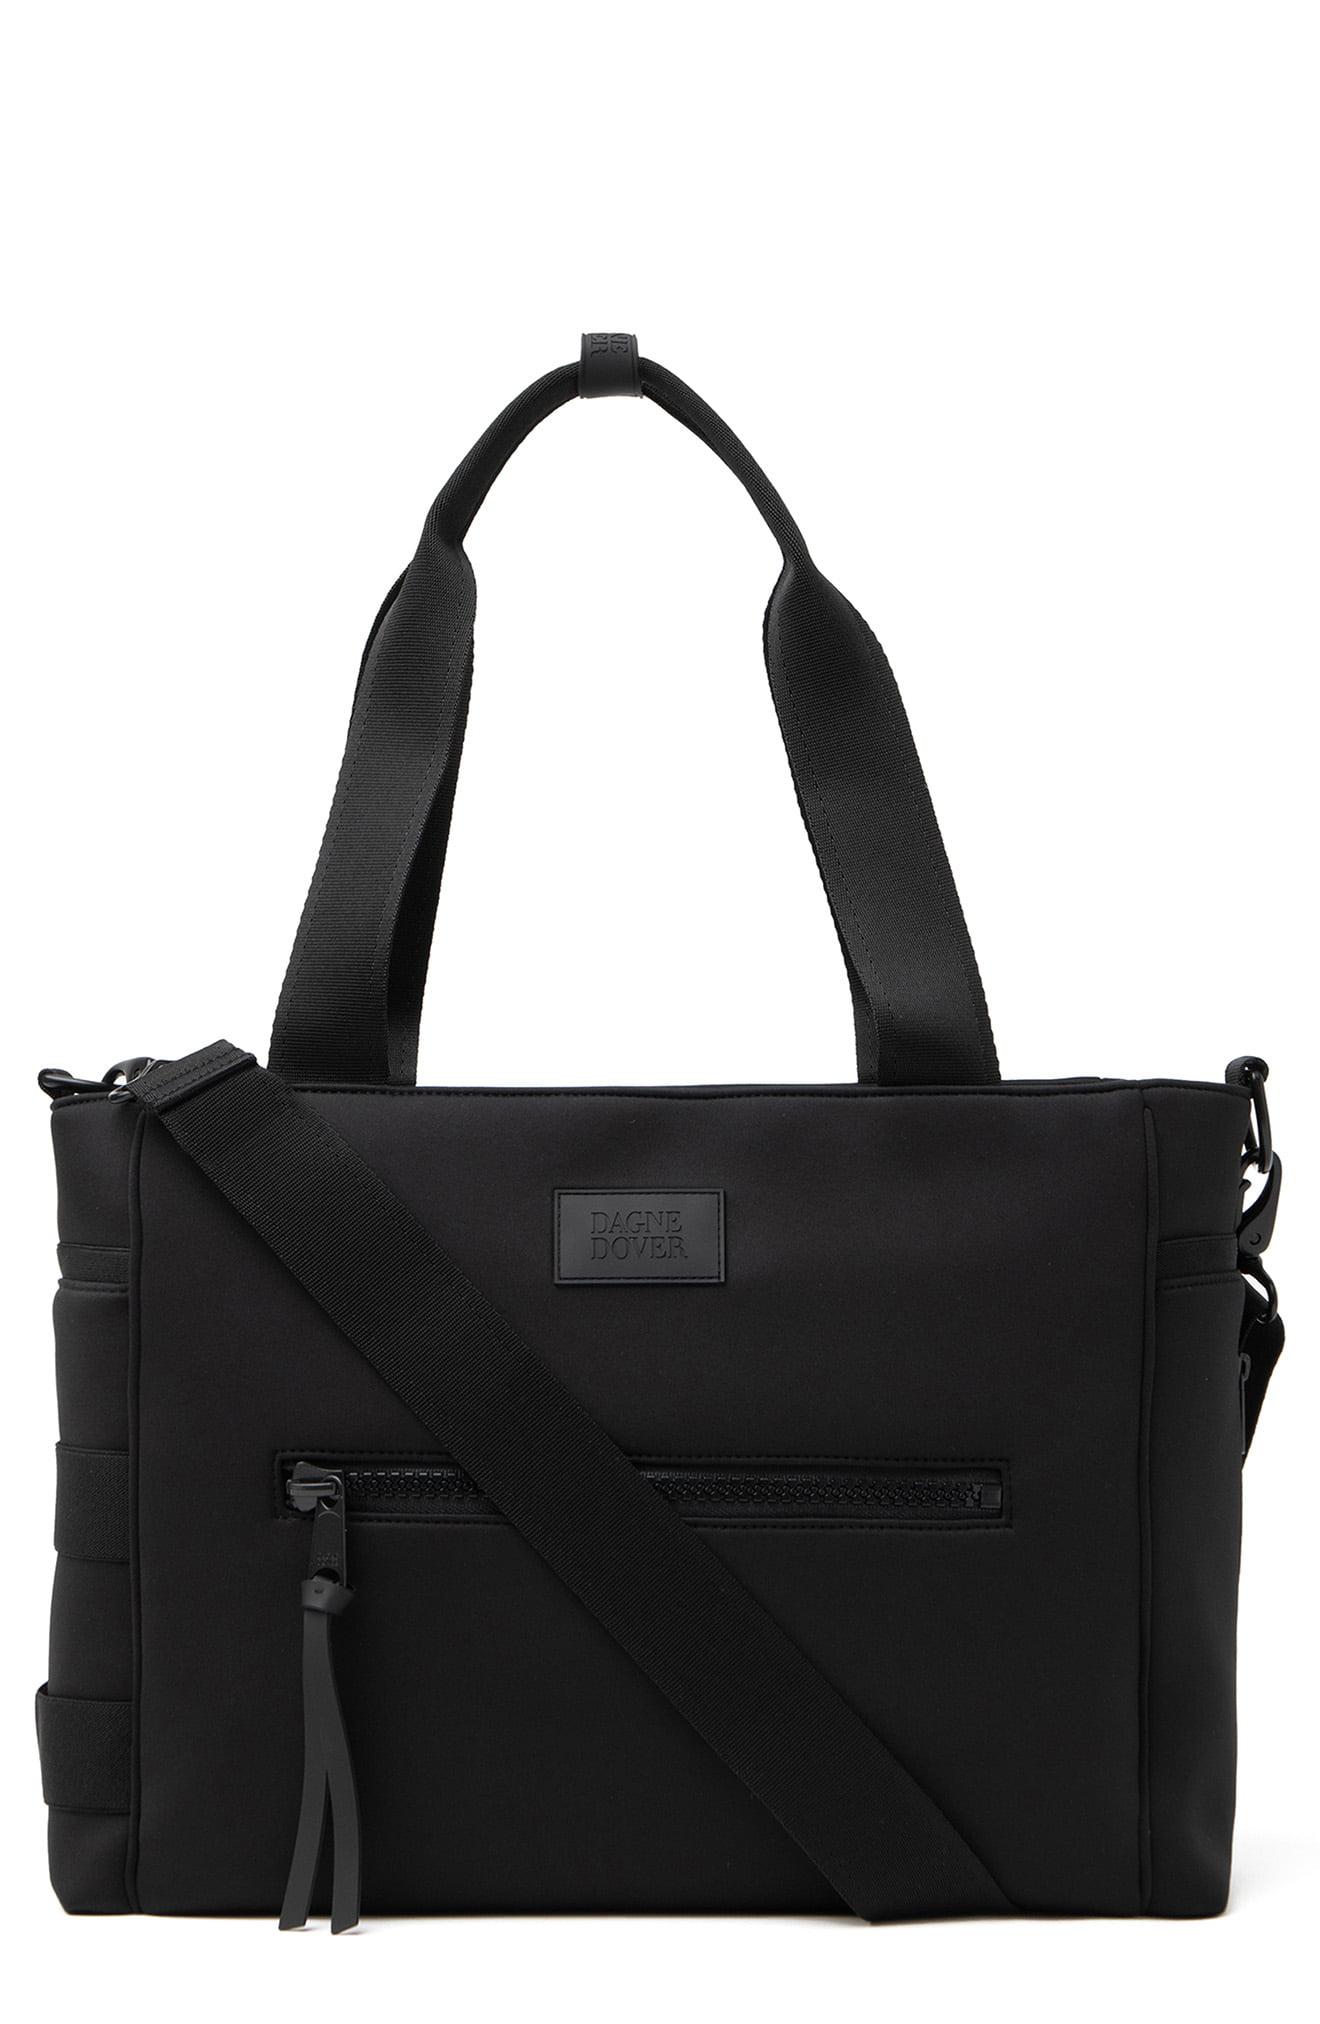 Dagne Dover Large Wade Diaper Tote in Onyx (Black) - Lyst